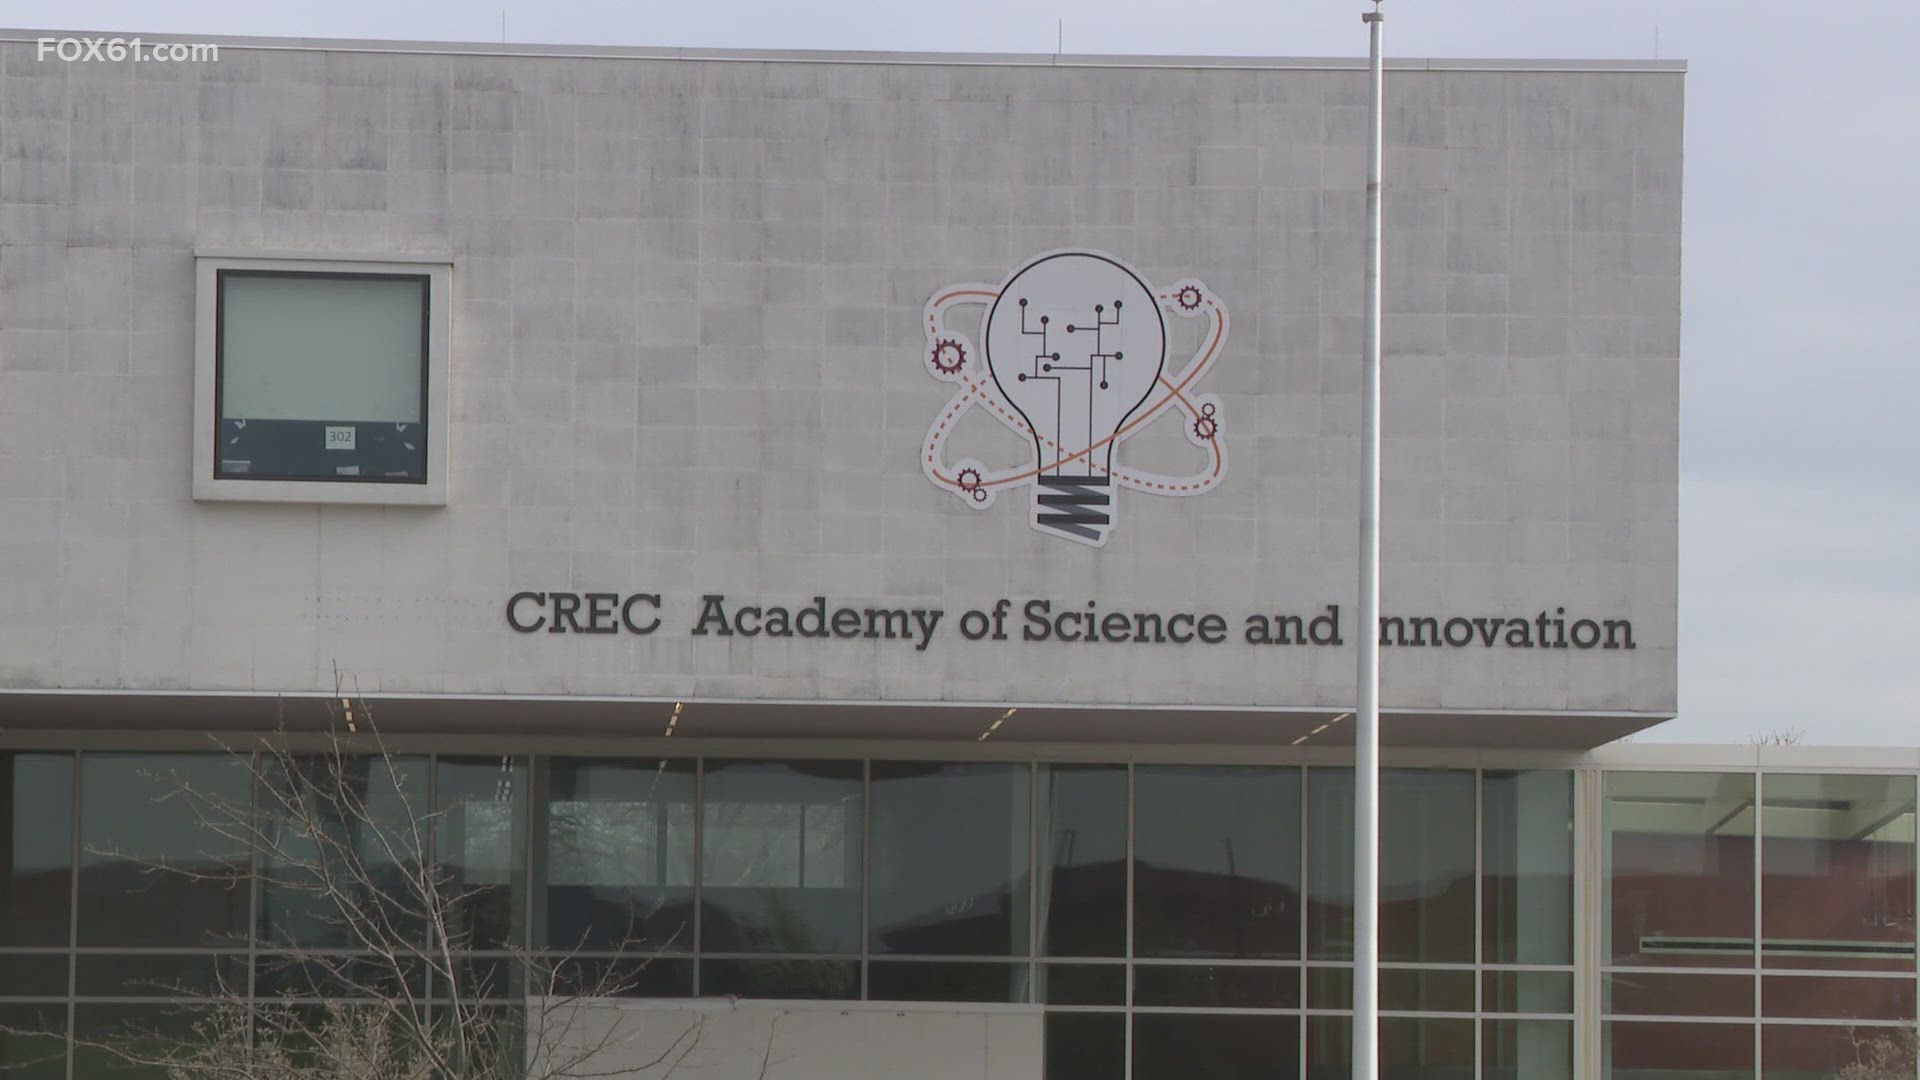 The student was hit by the school bus during dismissal around 2:15 p.m. at CREC Academy of Science of Innovation, according to school officials.